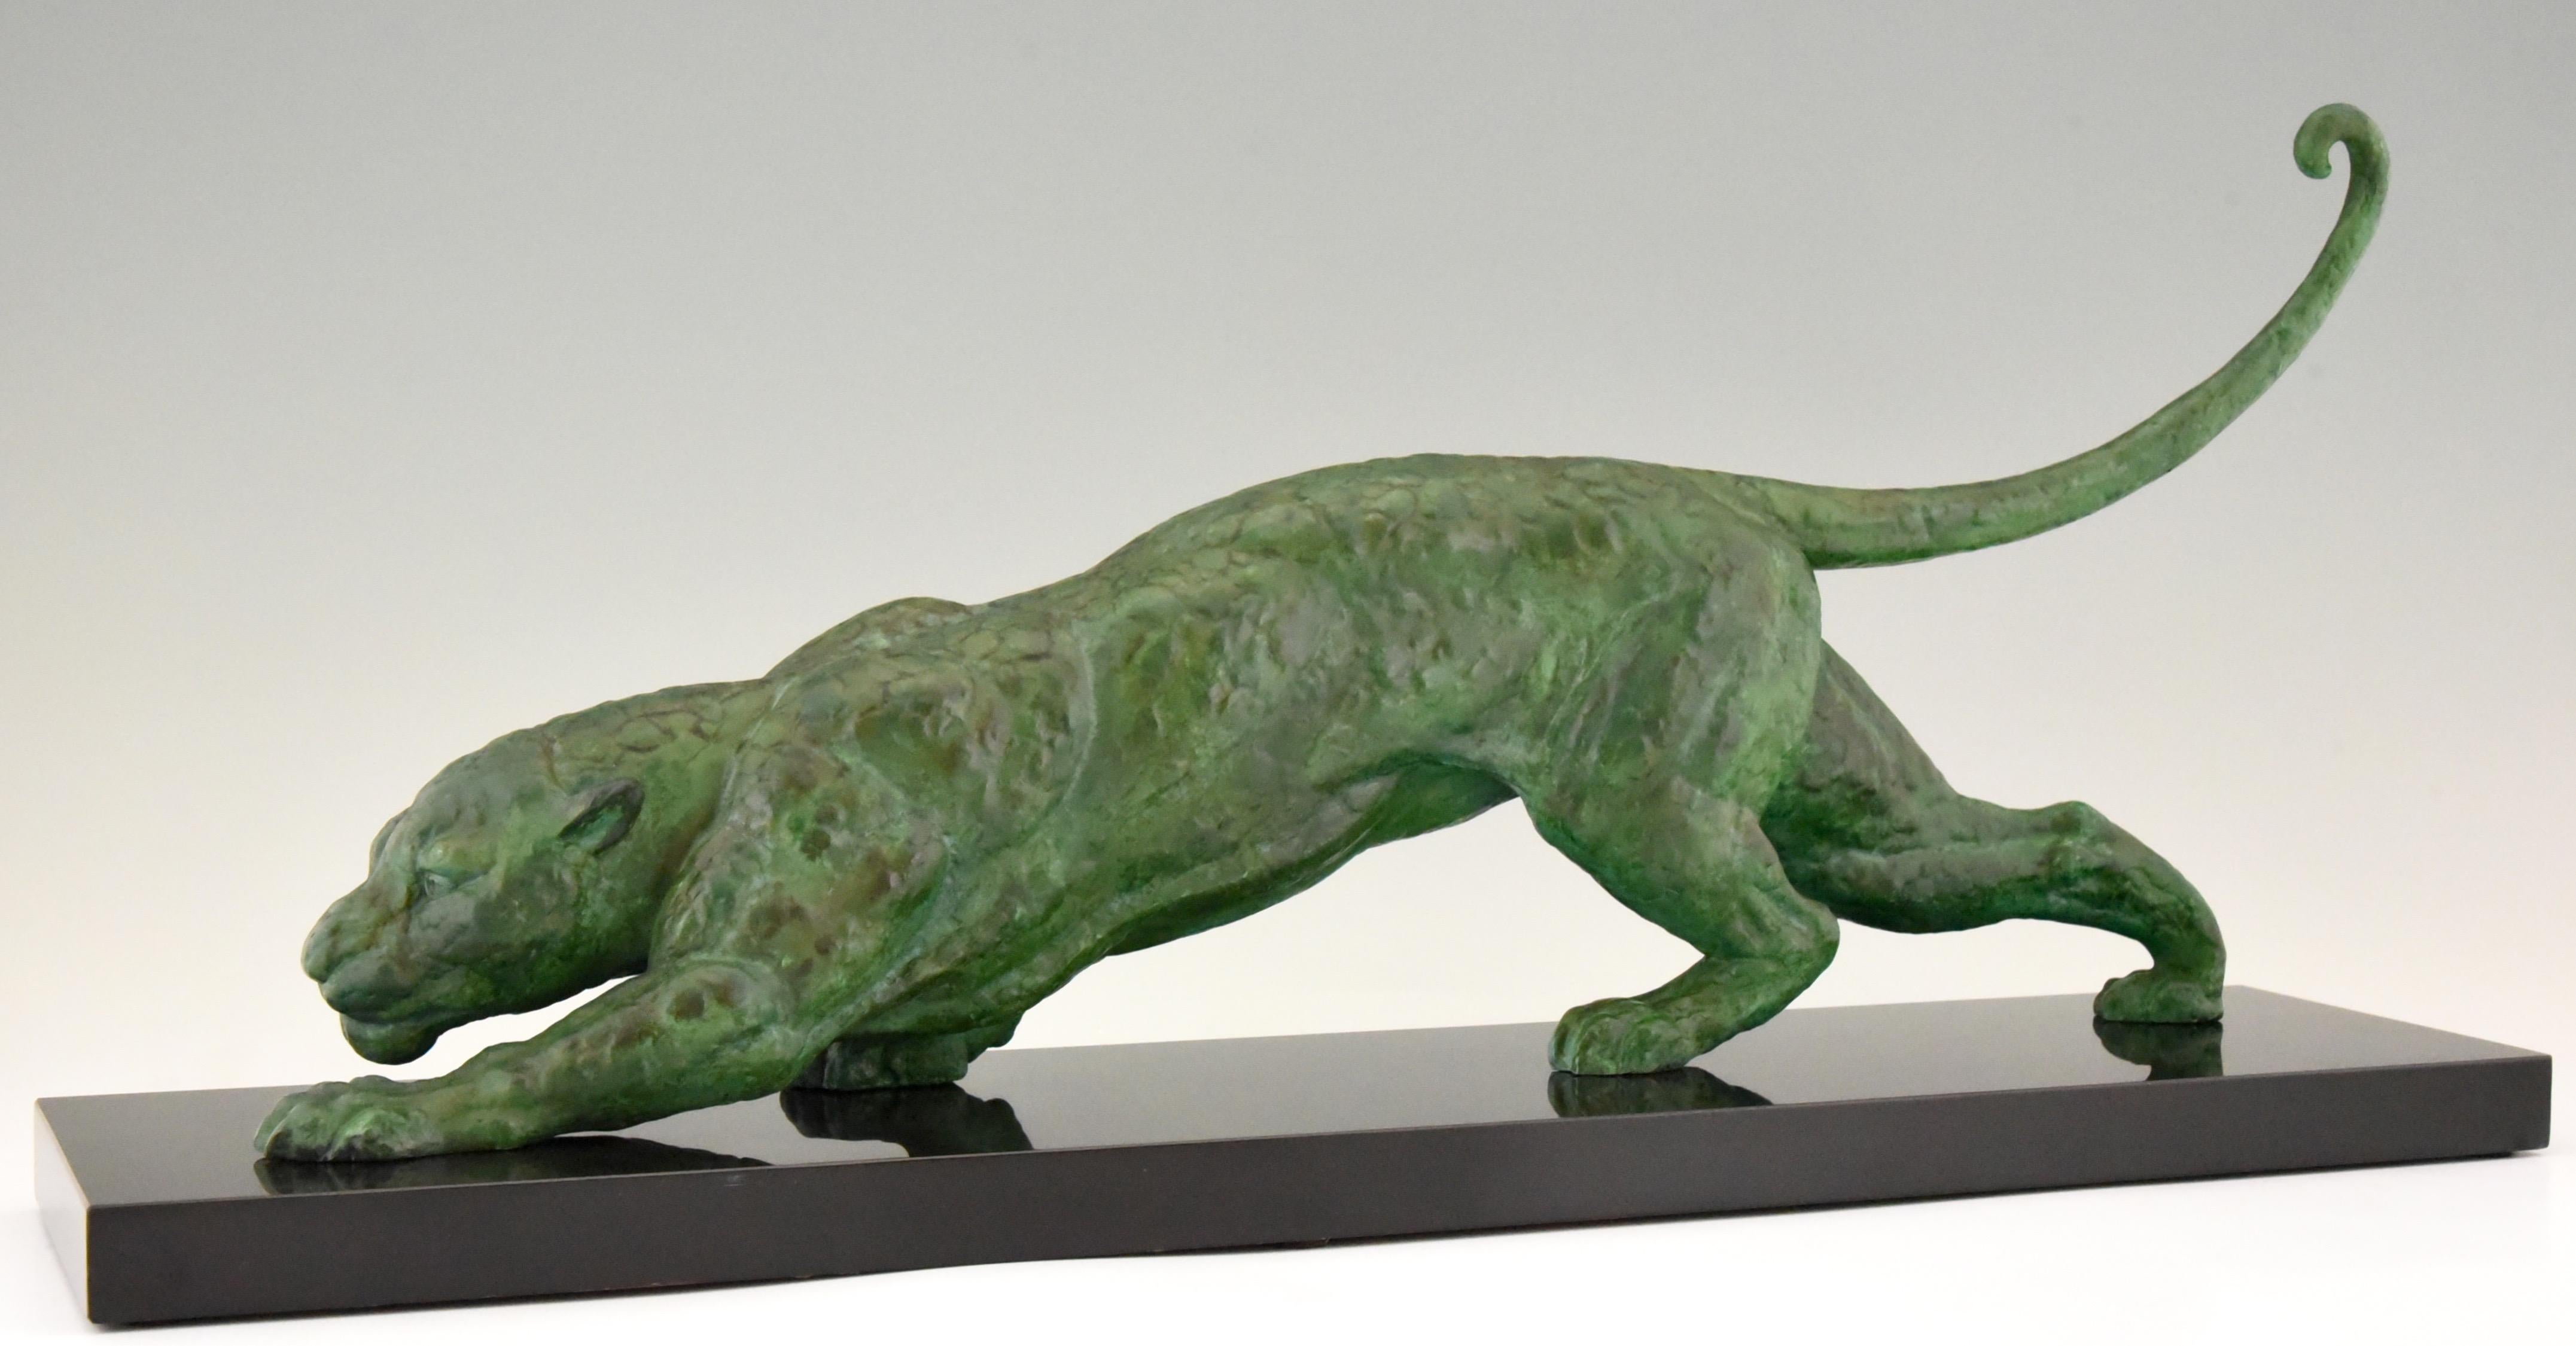 Art Deco sculpture of a panther by the famous Demetre Chiparus on a Belgian Black marble base.
Literature:
Art Deco and other figures by Brian Catley.?Art Deco sculpture by Victor Arwas, Academy.?Bronzes, sculptors and founders by H. Berman,